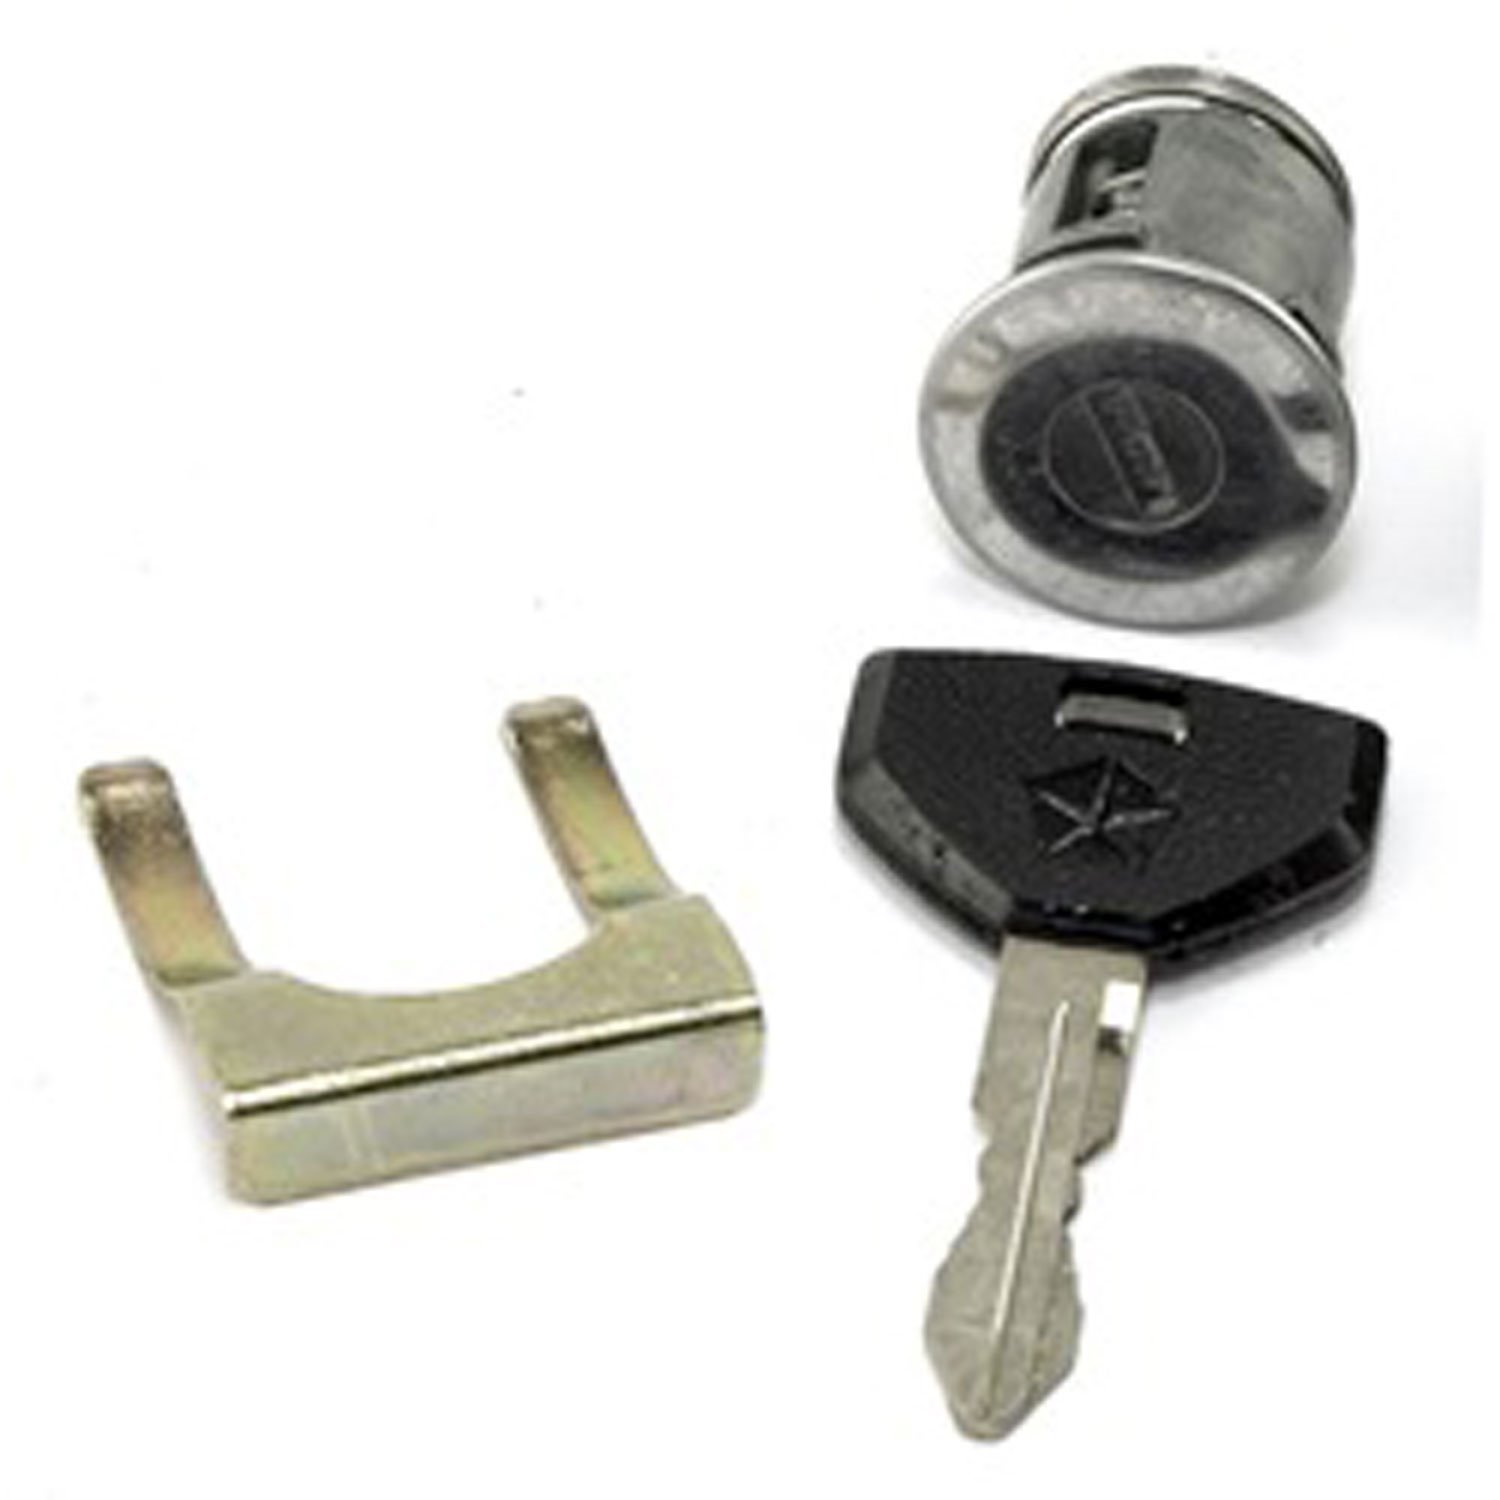 Replacement tailgate lock cylinder from Omix-ADA, Fits 91-94 Jeep Wrangler YJ Key included.